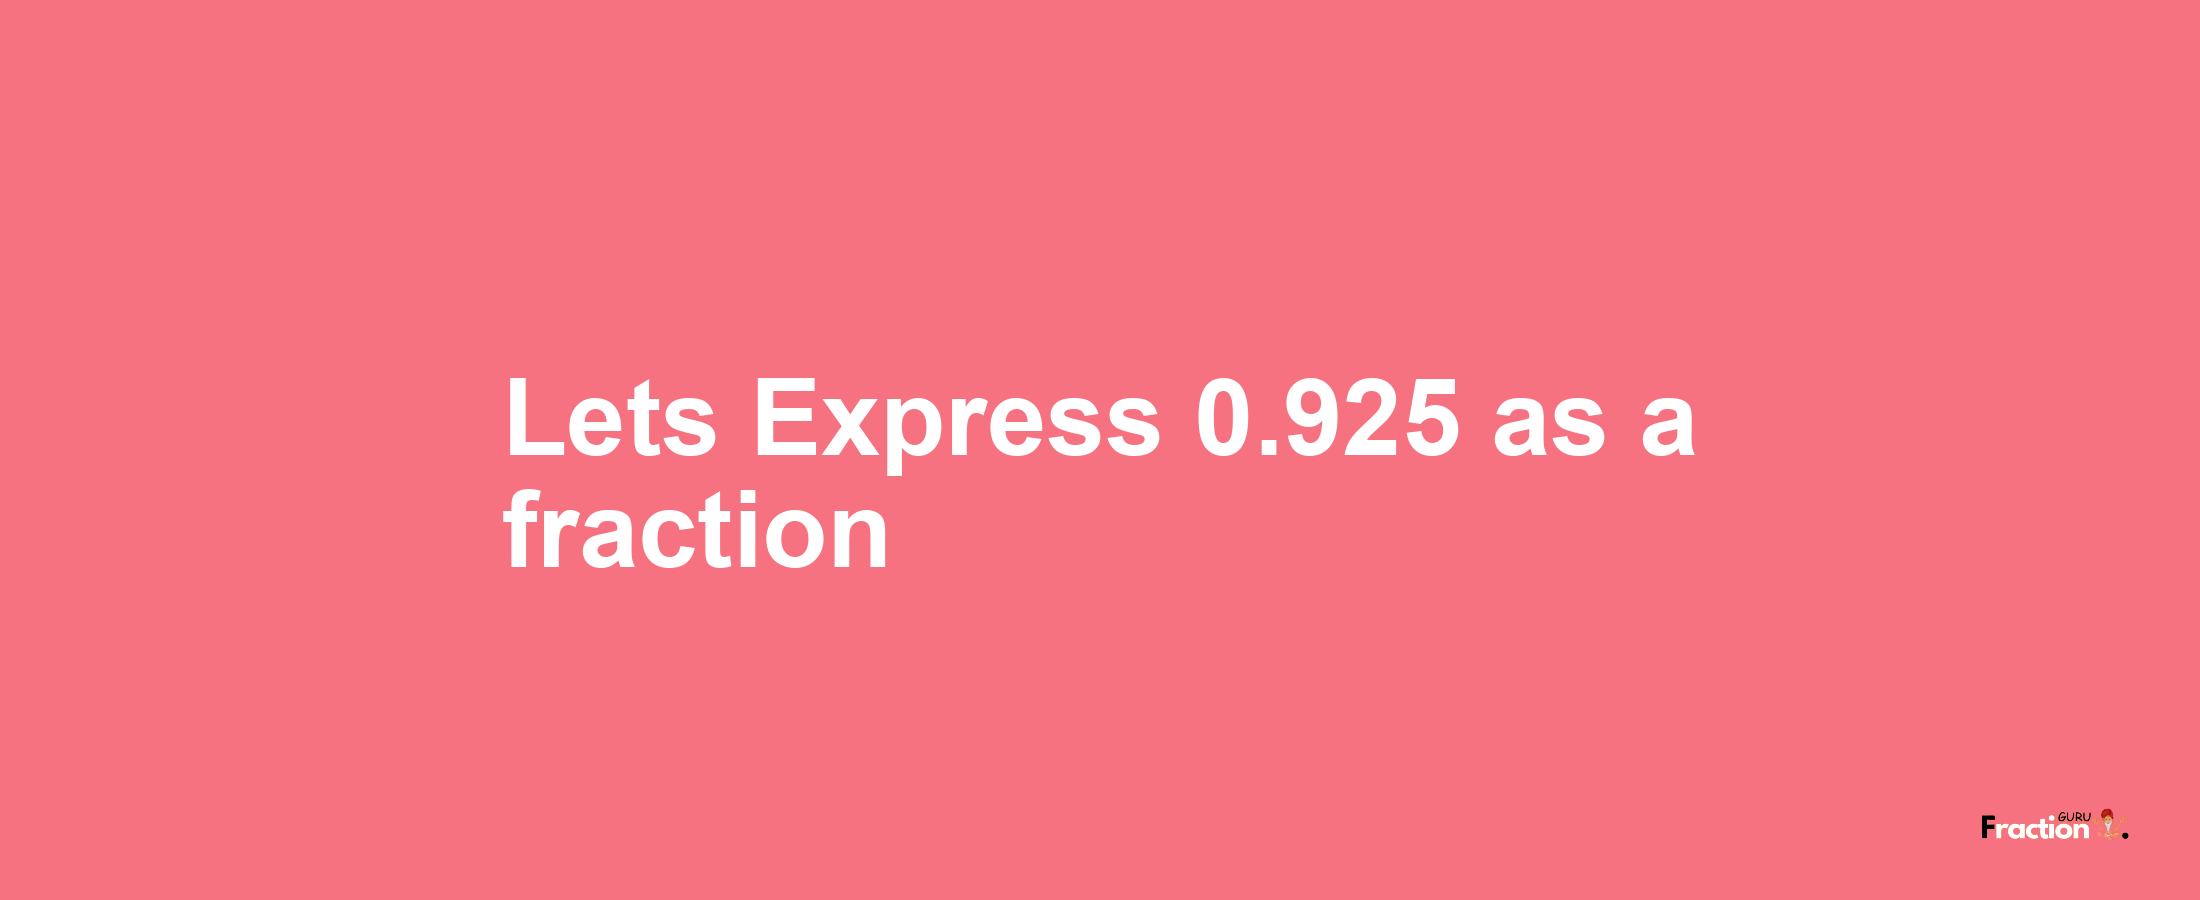 Lets Express 0.925 as afraction